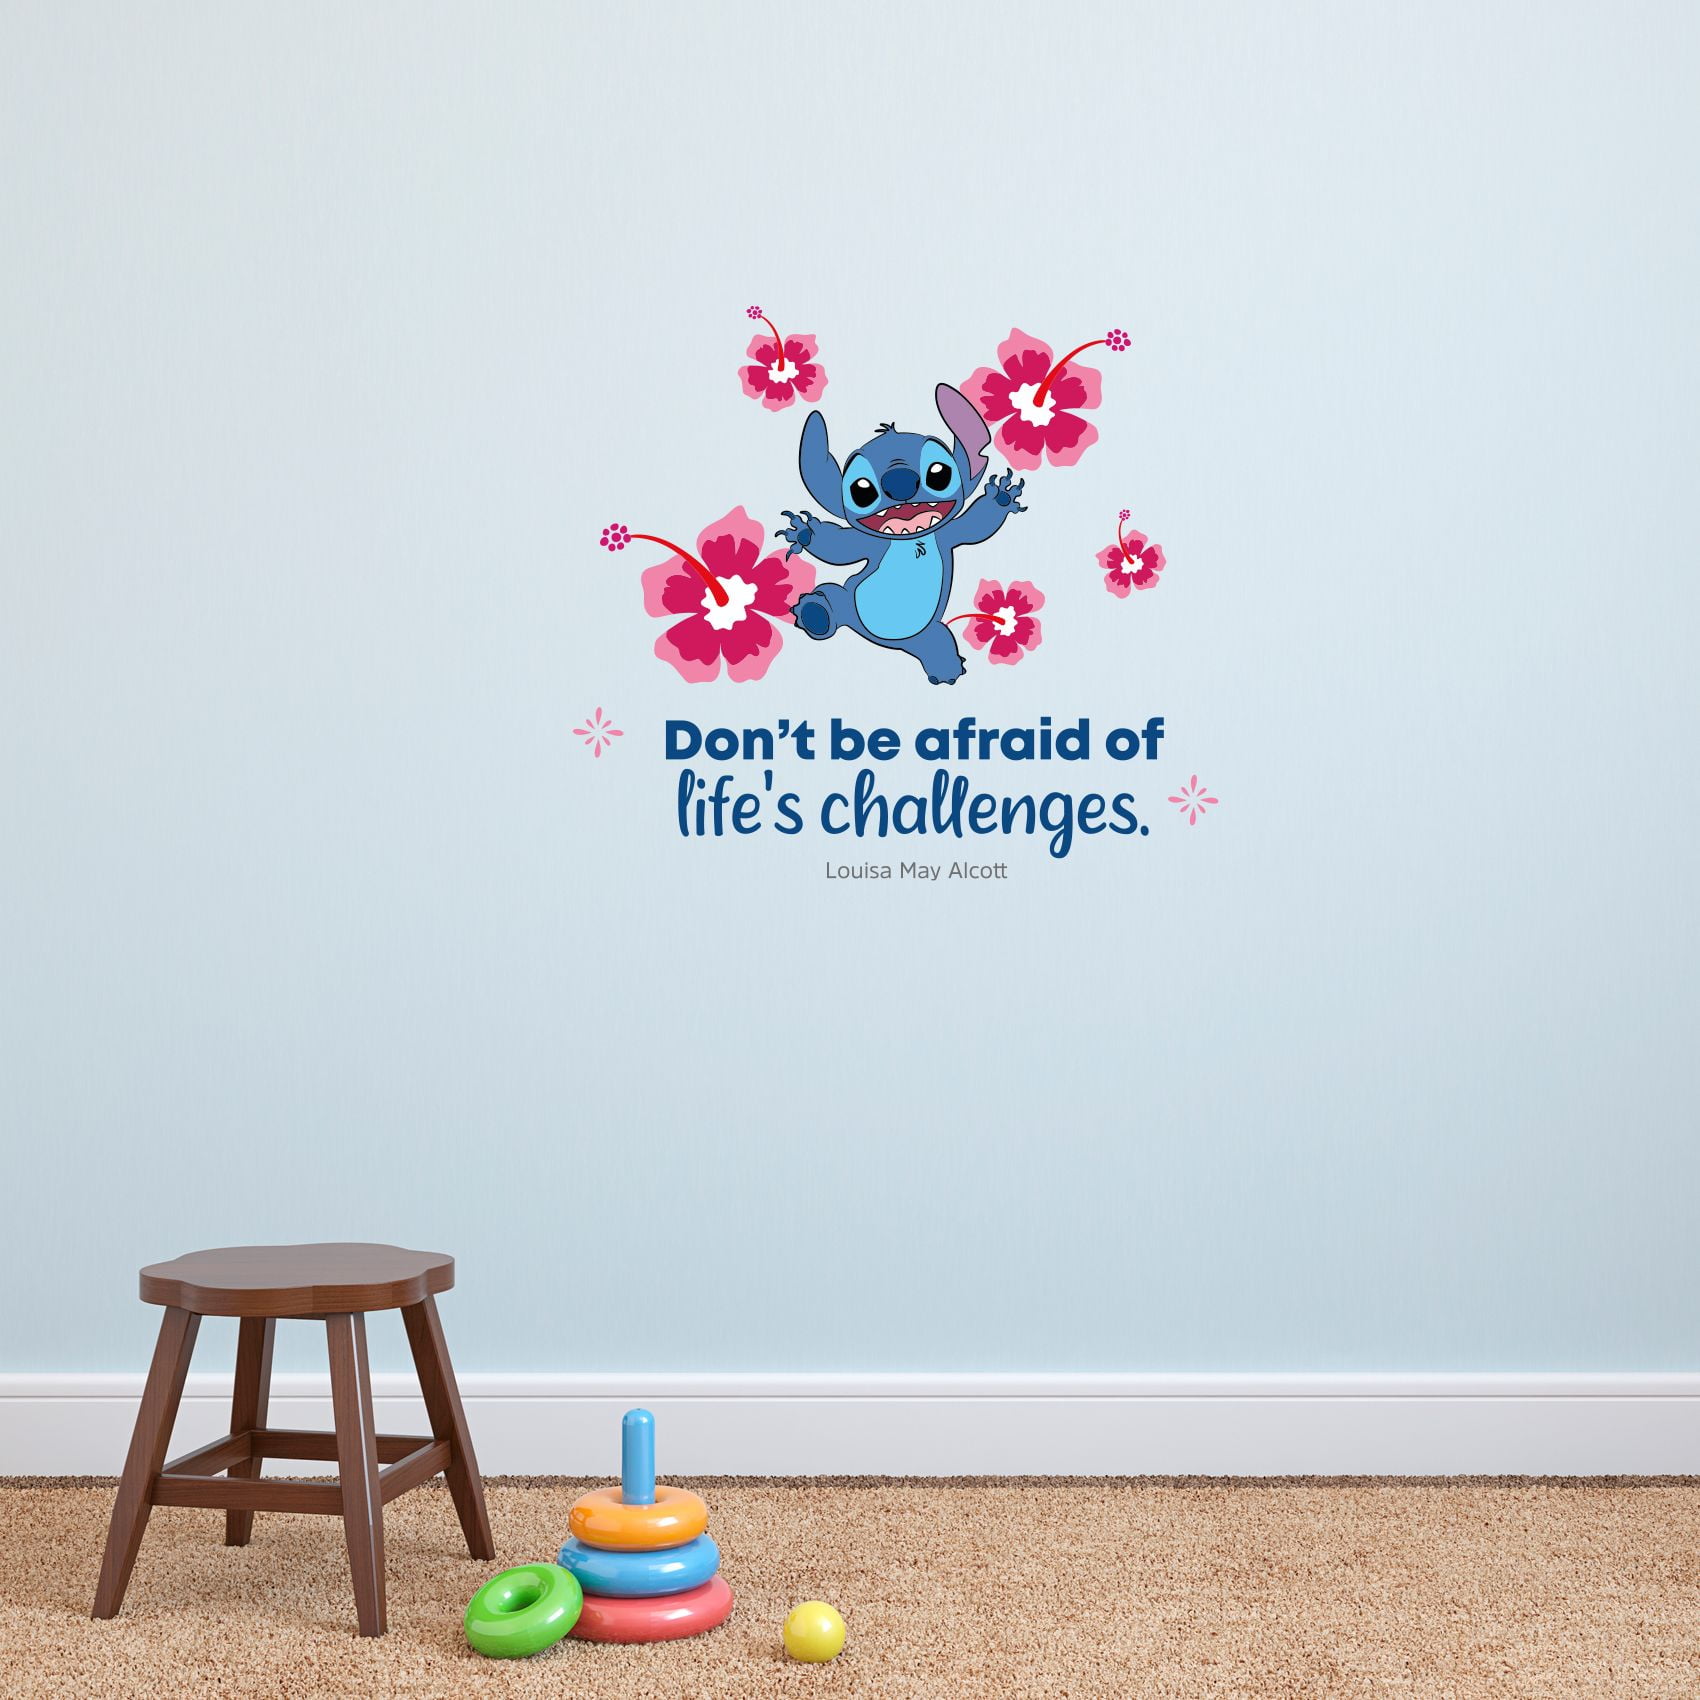  Stitch Cartoon Wall Stickers, Self-Adhesive Water-Resistant  Boy's Bedroom Decorative Decals (Style 5) : Tools & Home Improvement